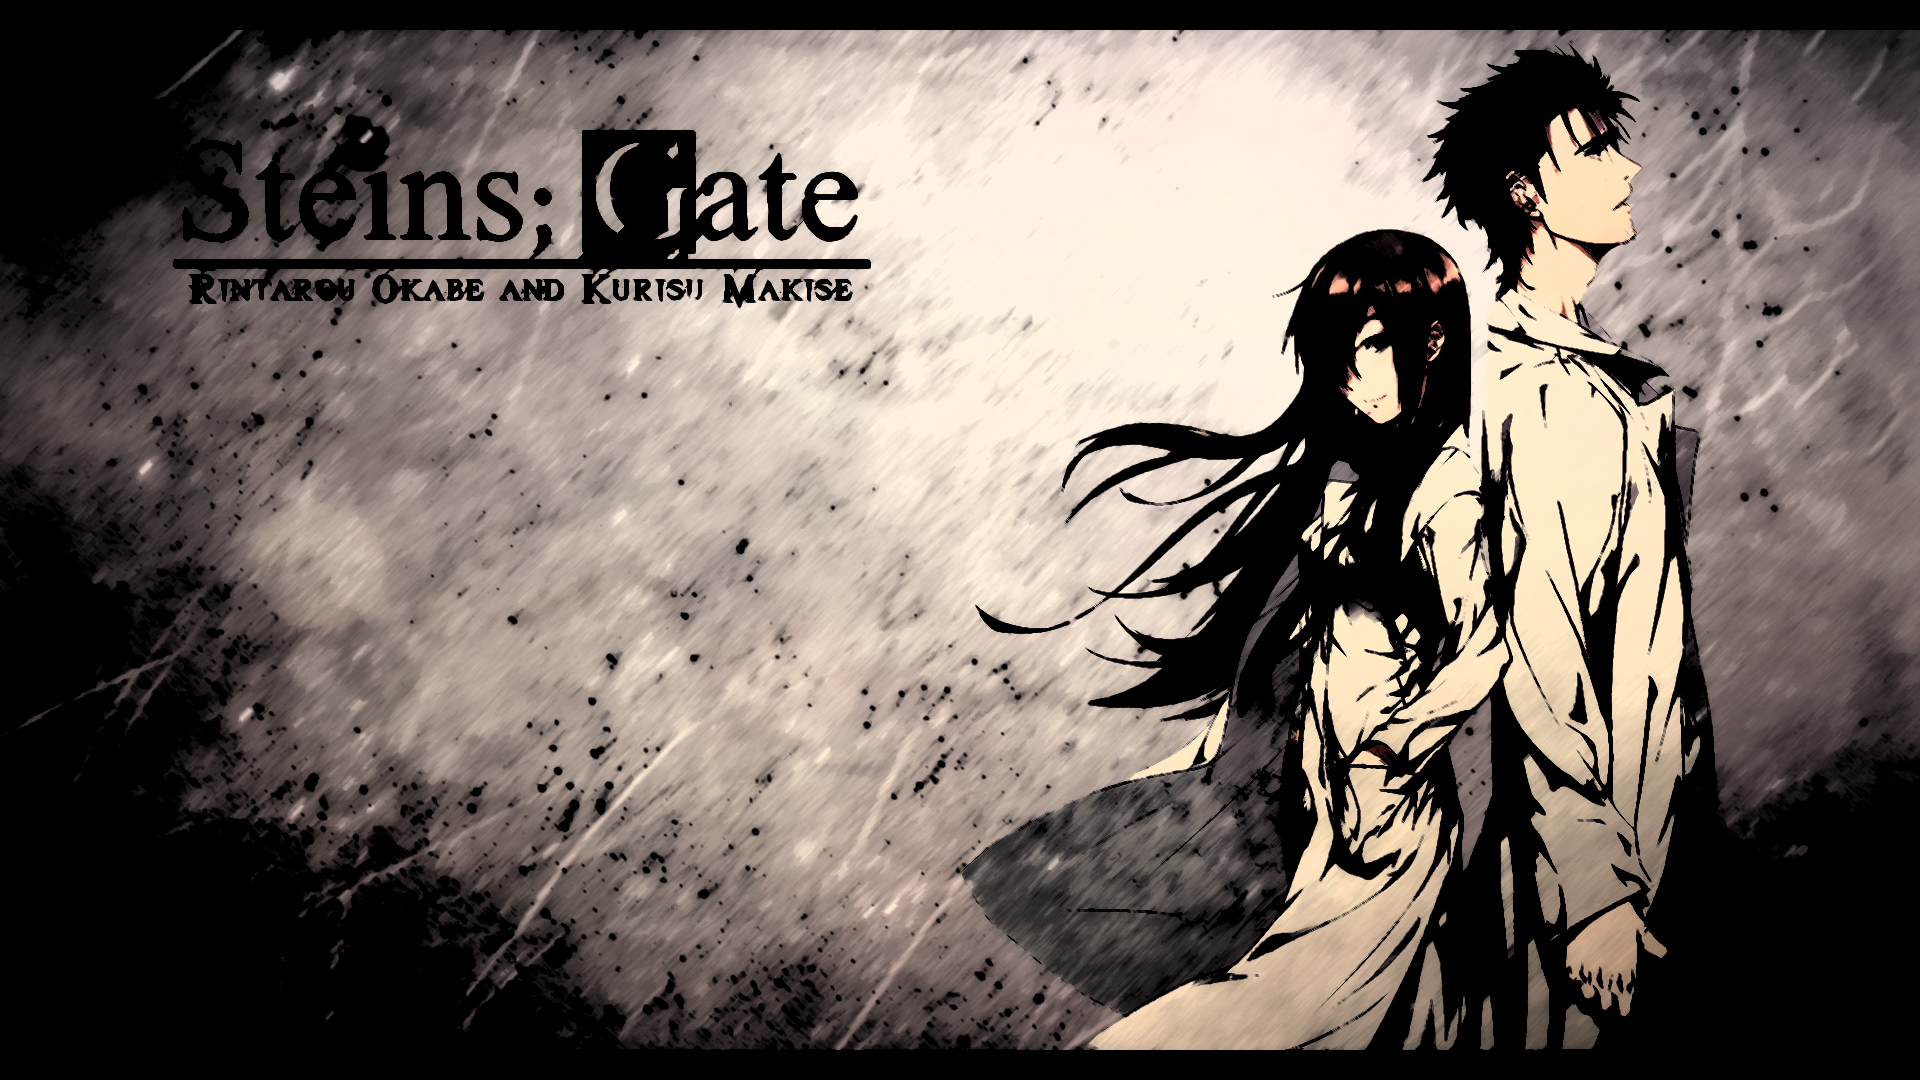 Steins Gate Episode 23 Beta Review Steins Gate 0 Prequel Containing Spoilers Moregeekythings